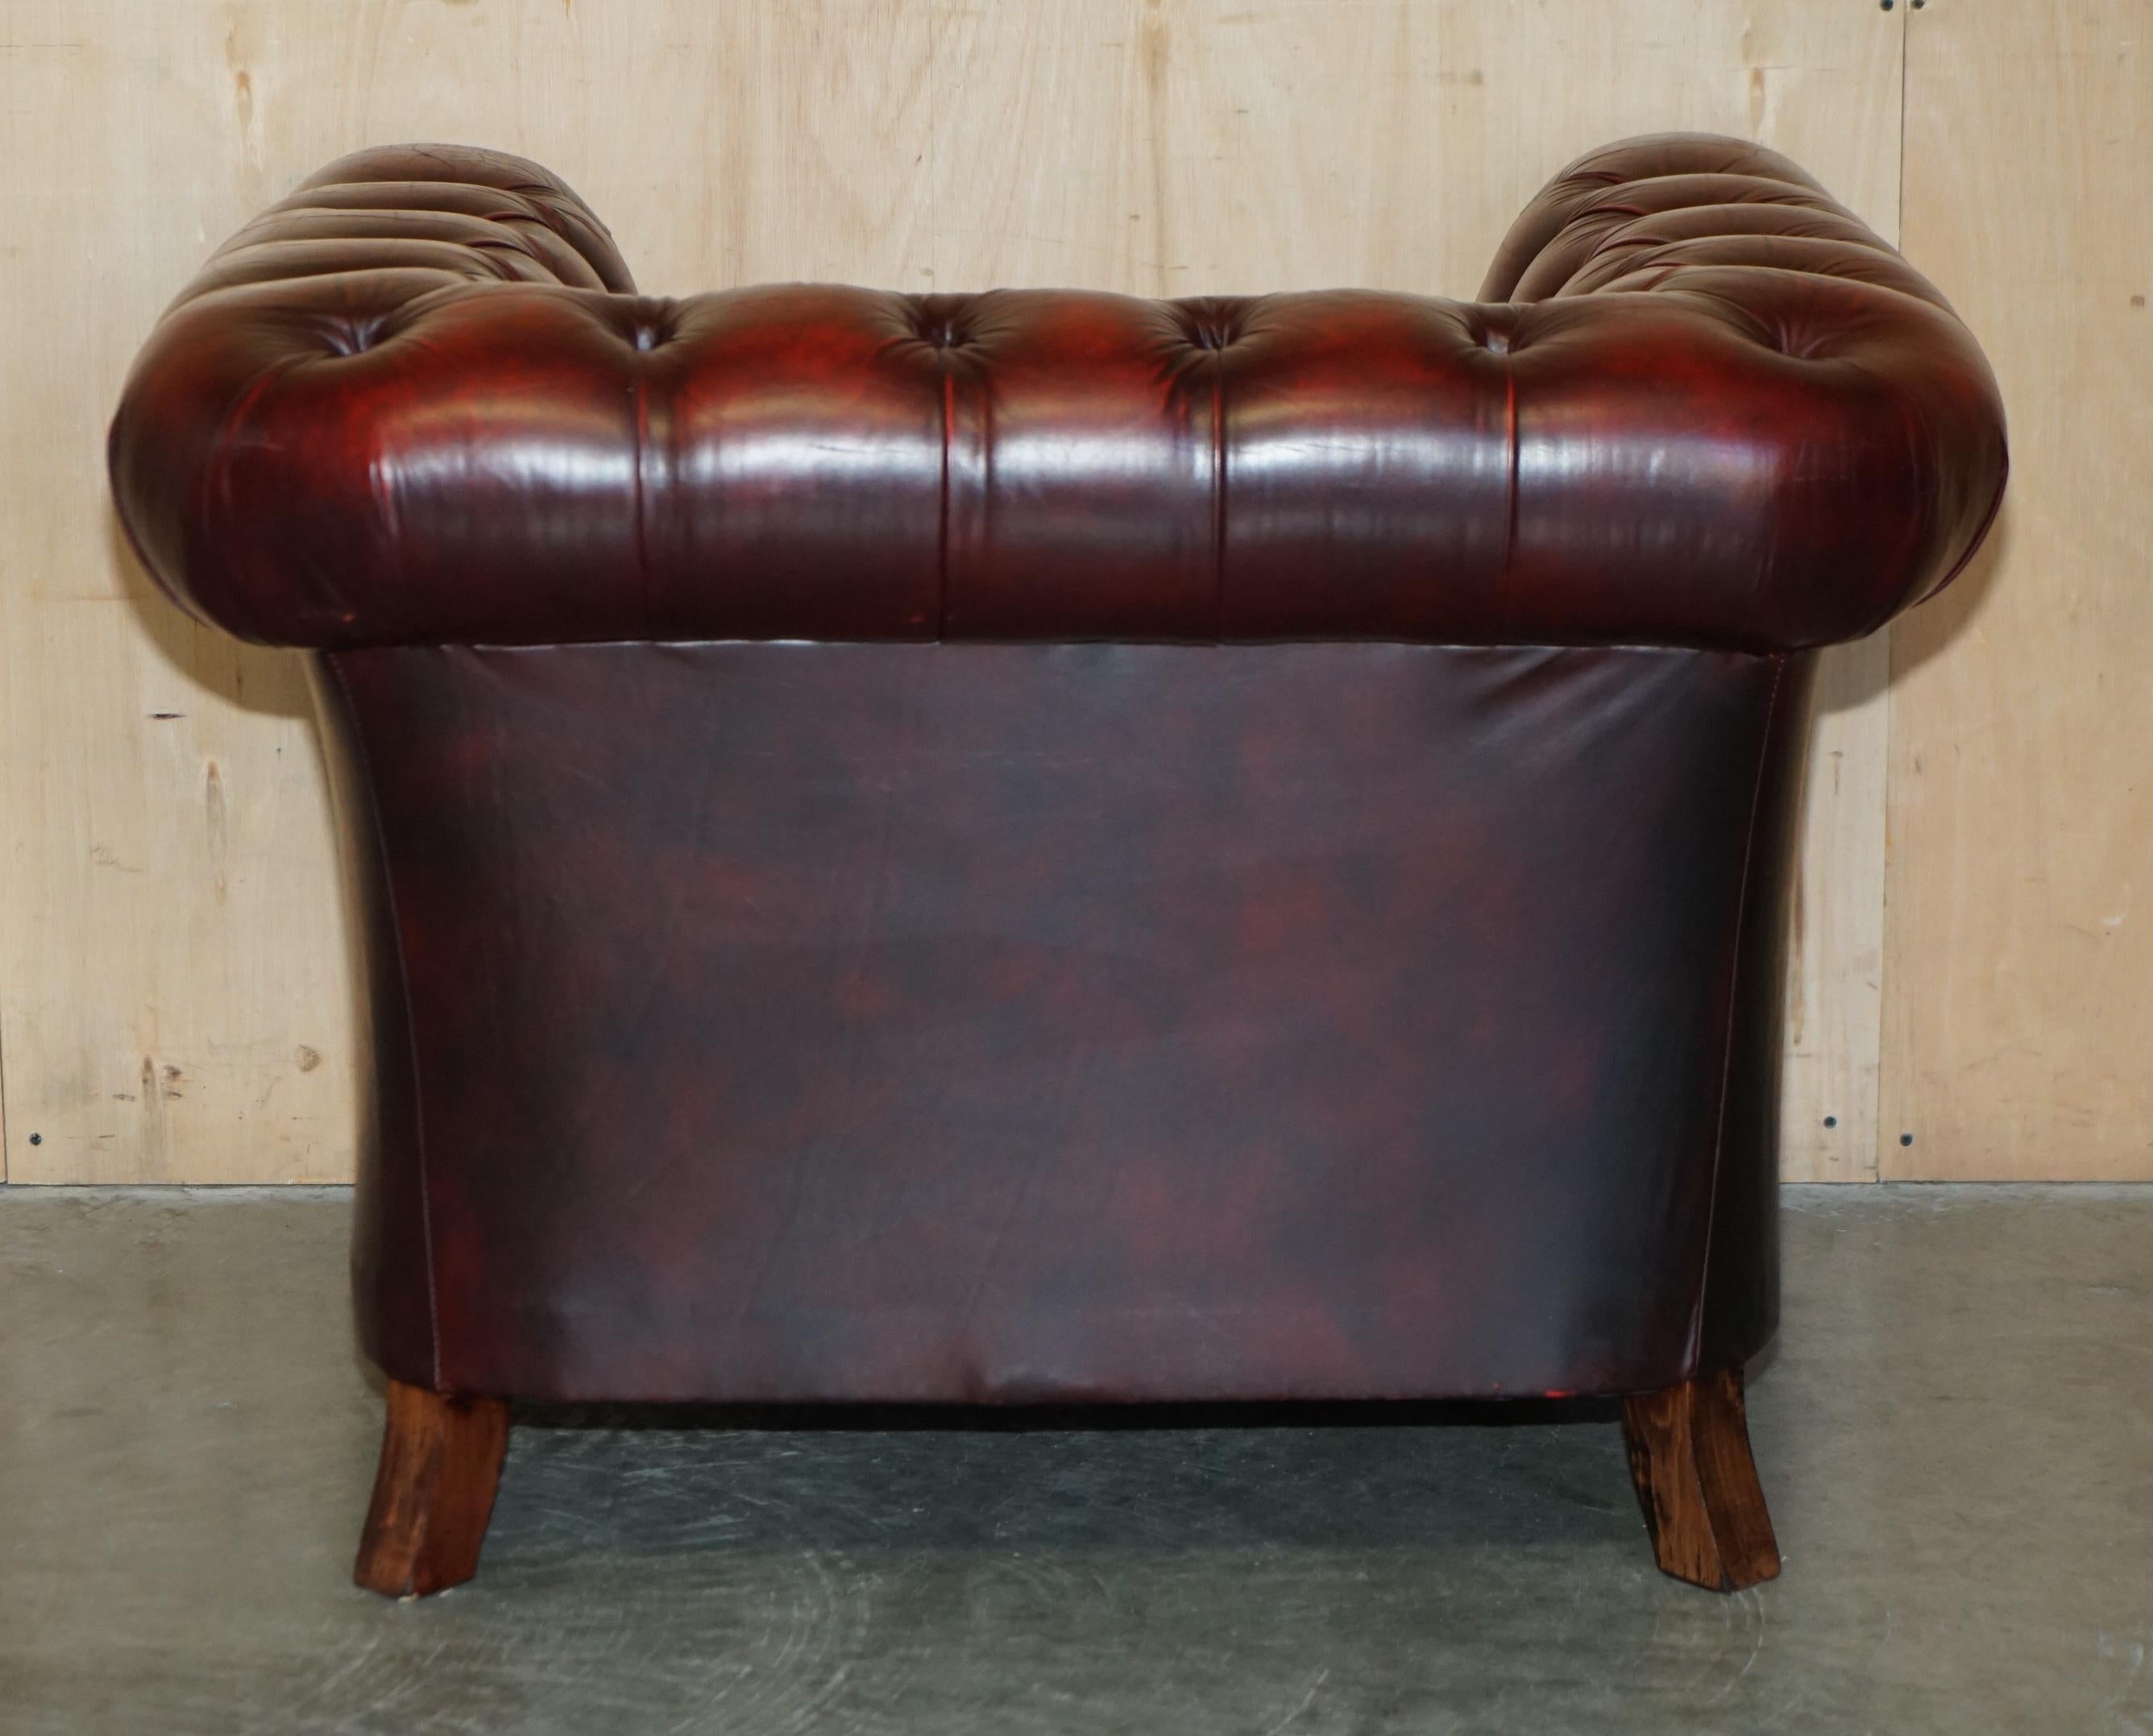 PAIR OF ViNTAGE OXBLOOD LEATHER CHESTERFIELD CLUB ARMCHAIRS WITH ELEGANT LEGS 13